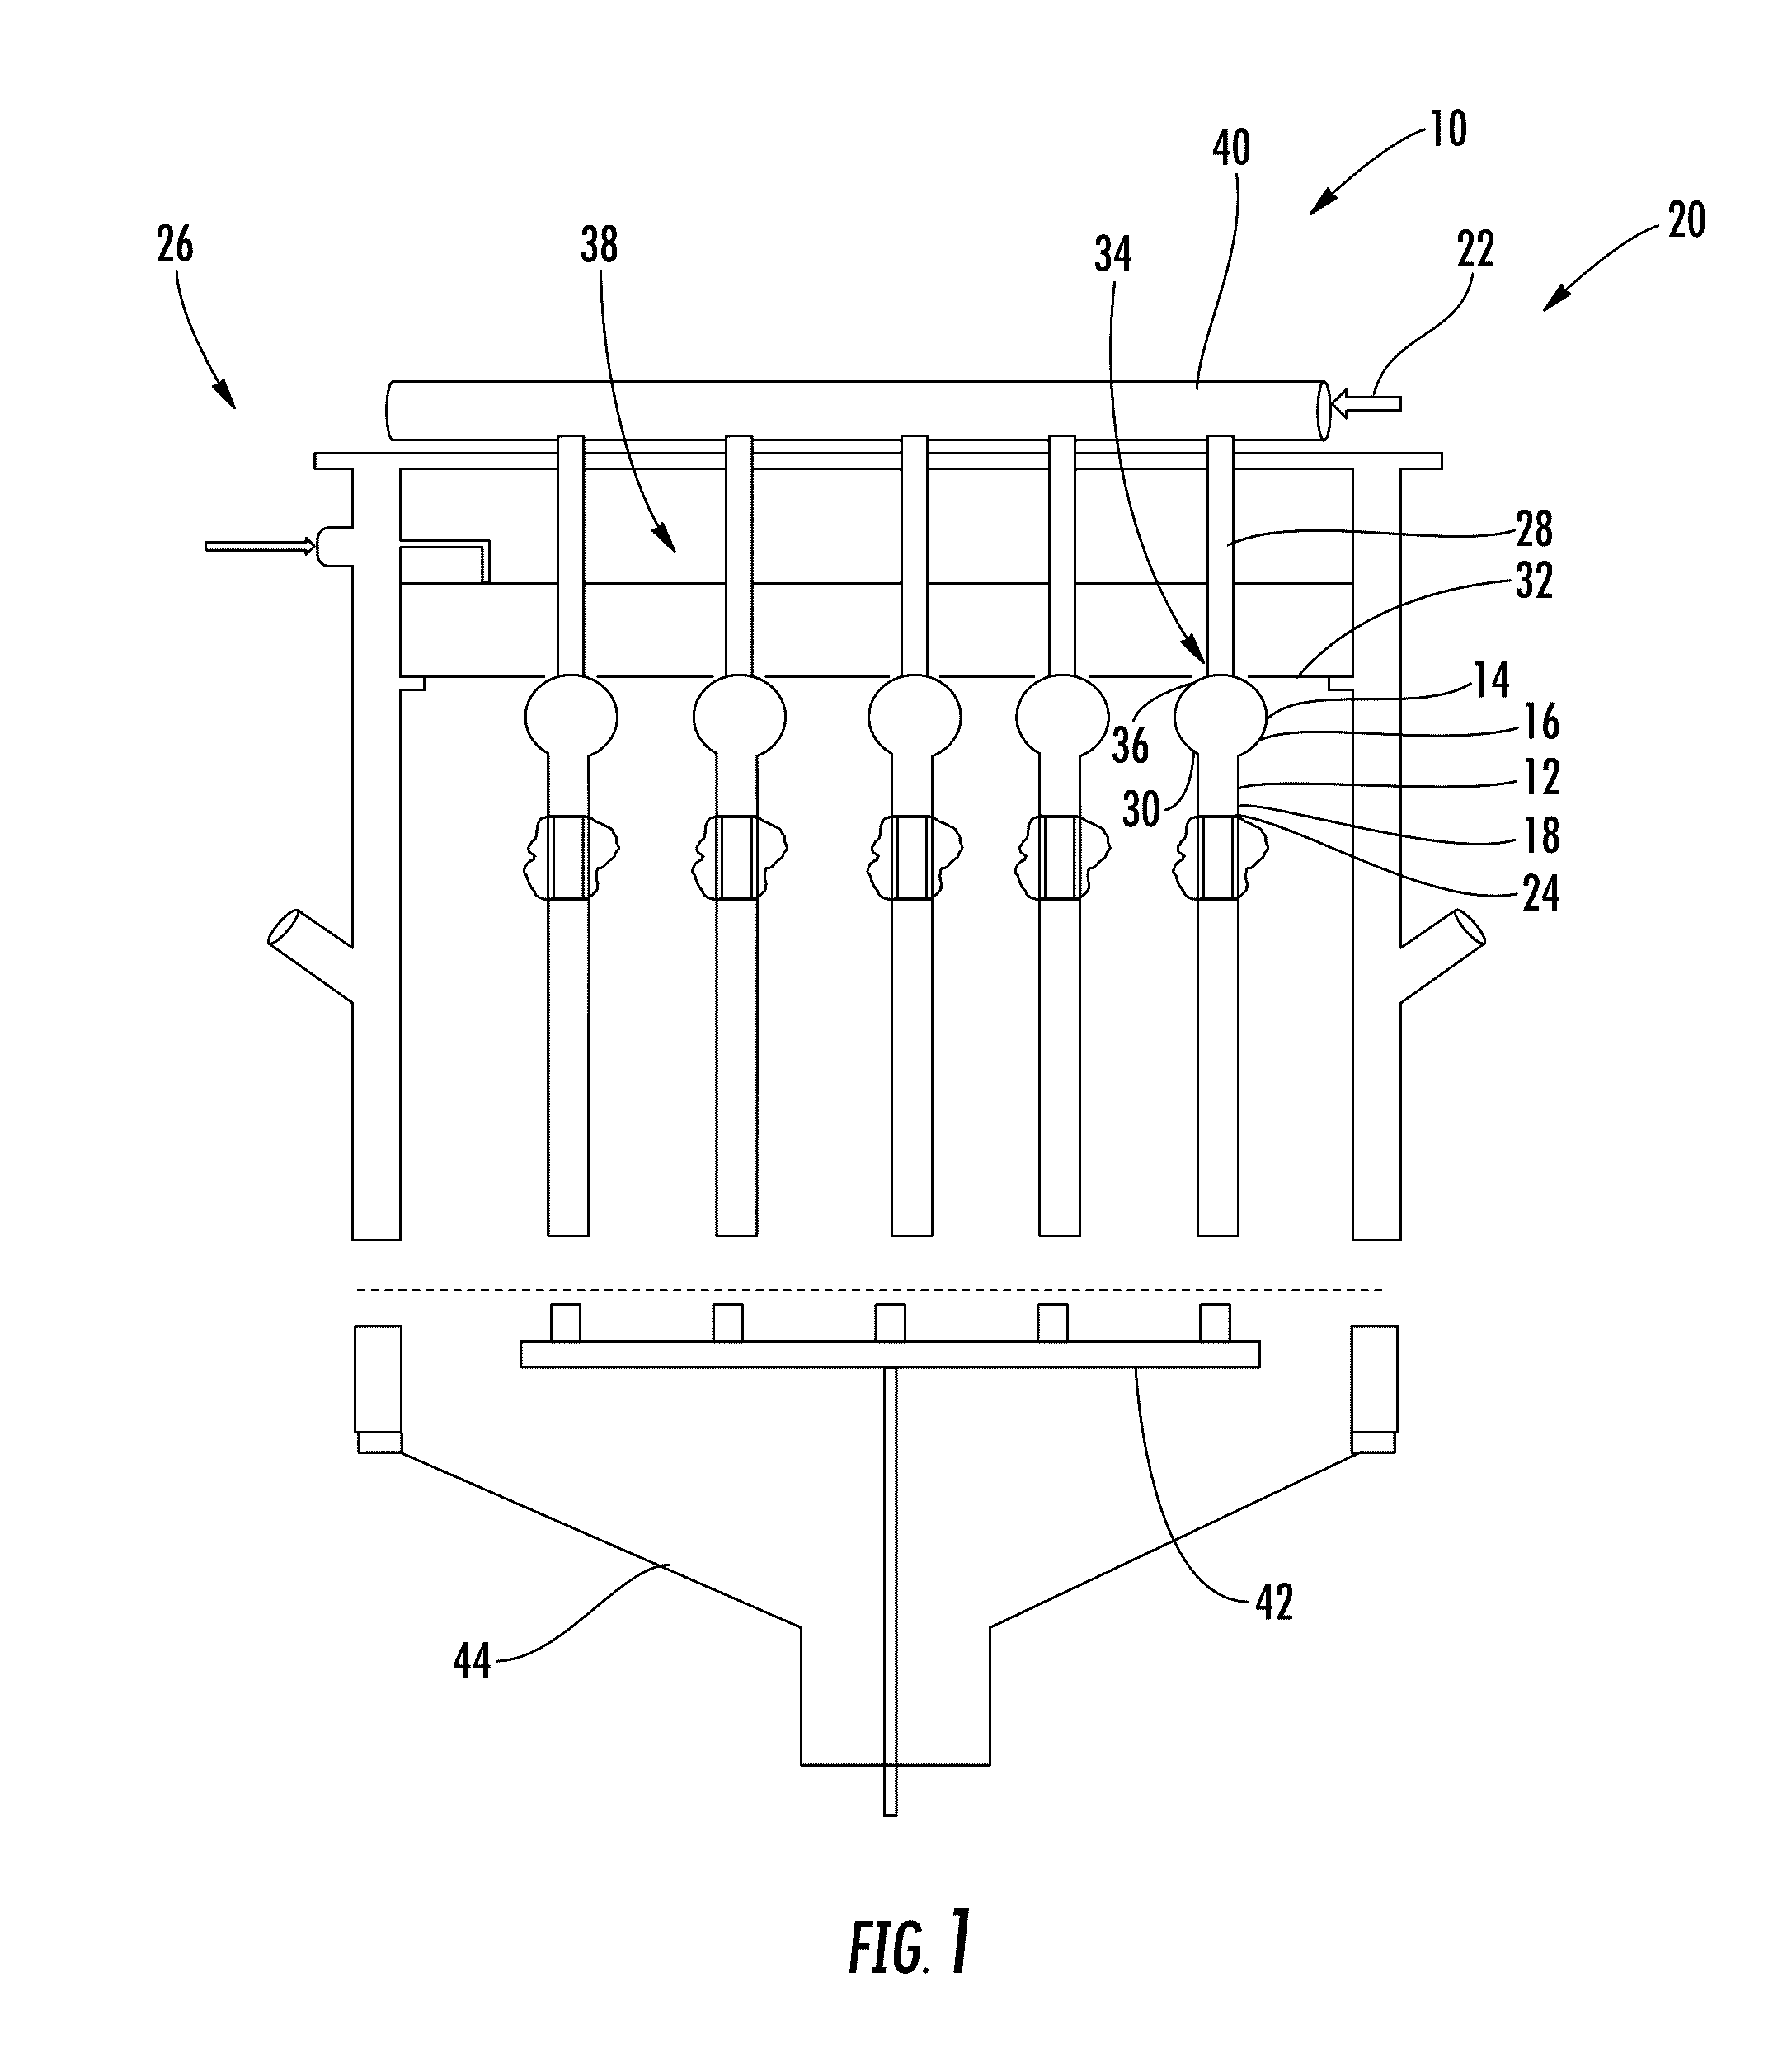 Passive heat and mass transfer system